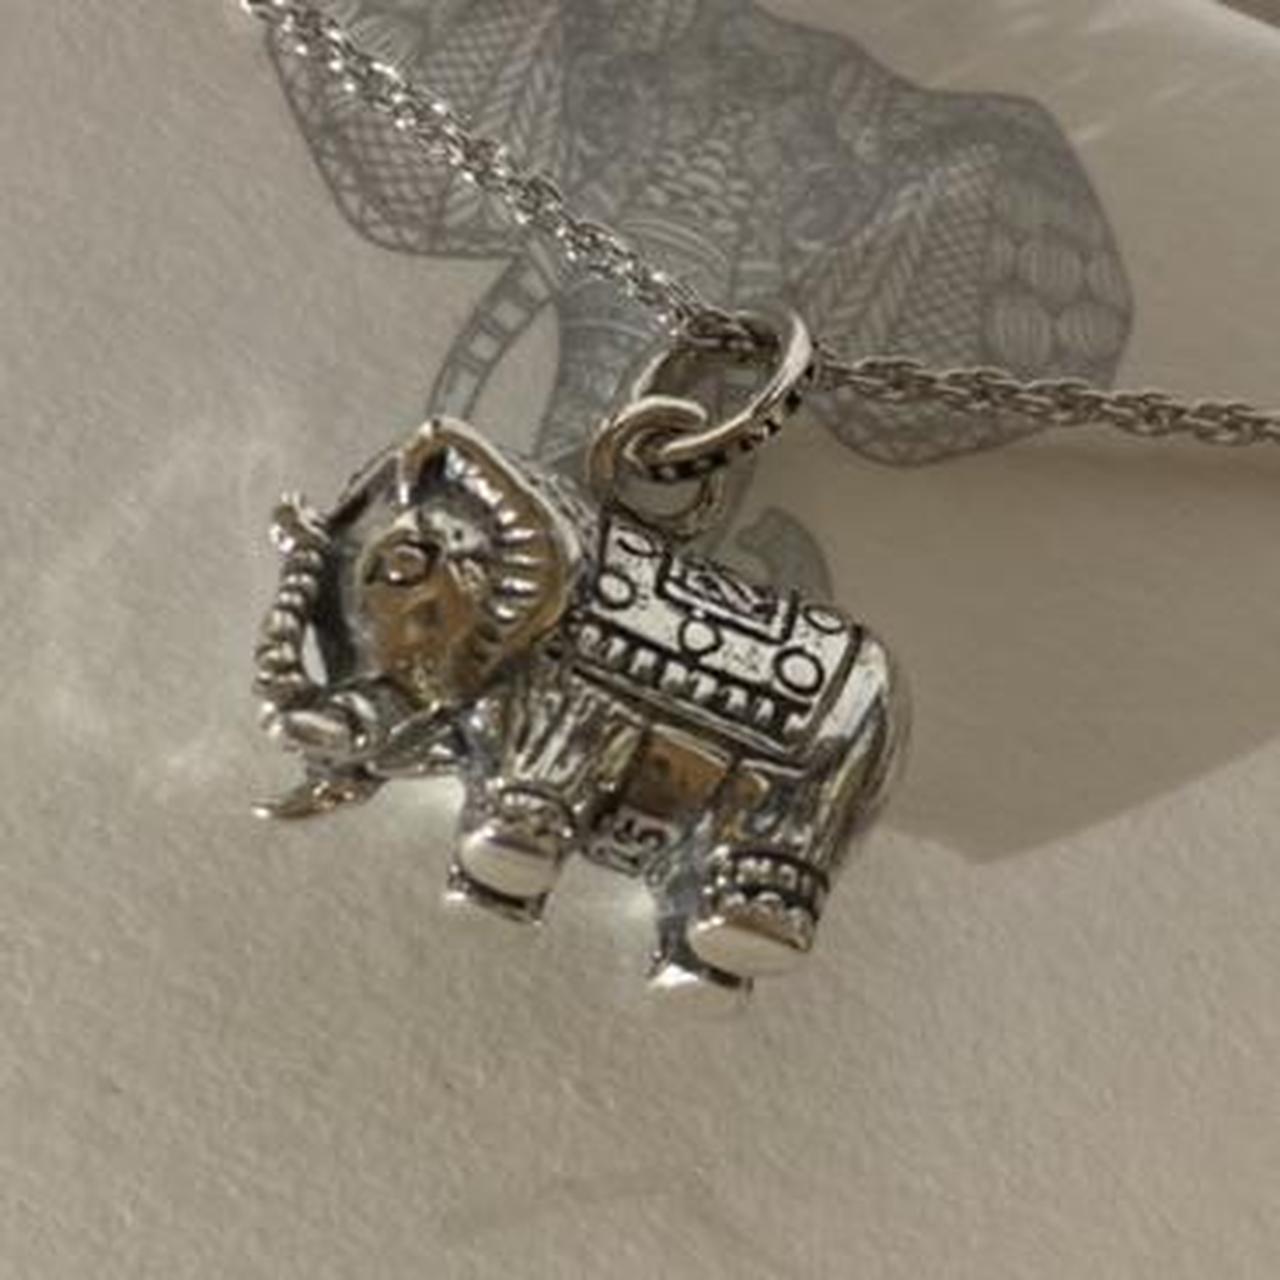 ANNIKA WITT Made in Bali .925 Sterling Silver Ornate Elephant 3D Necklace  New | eBay